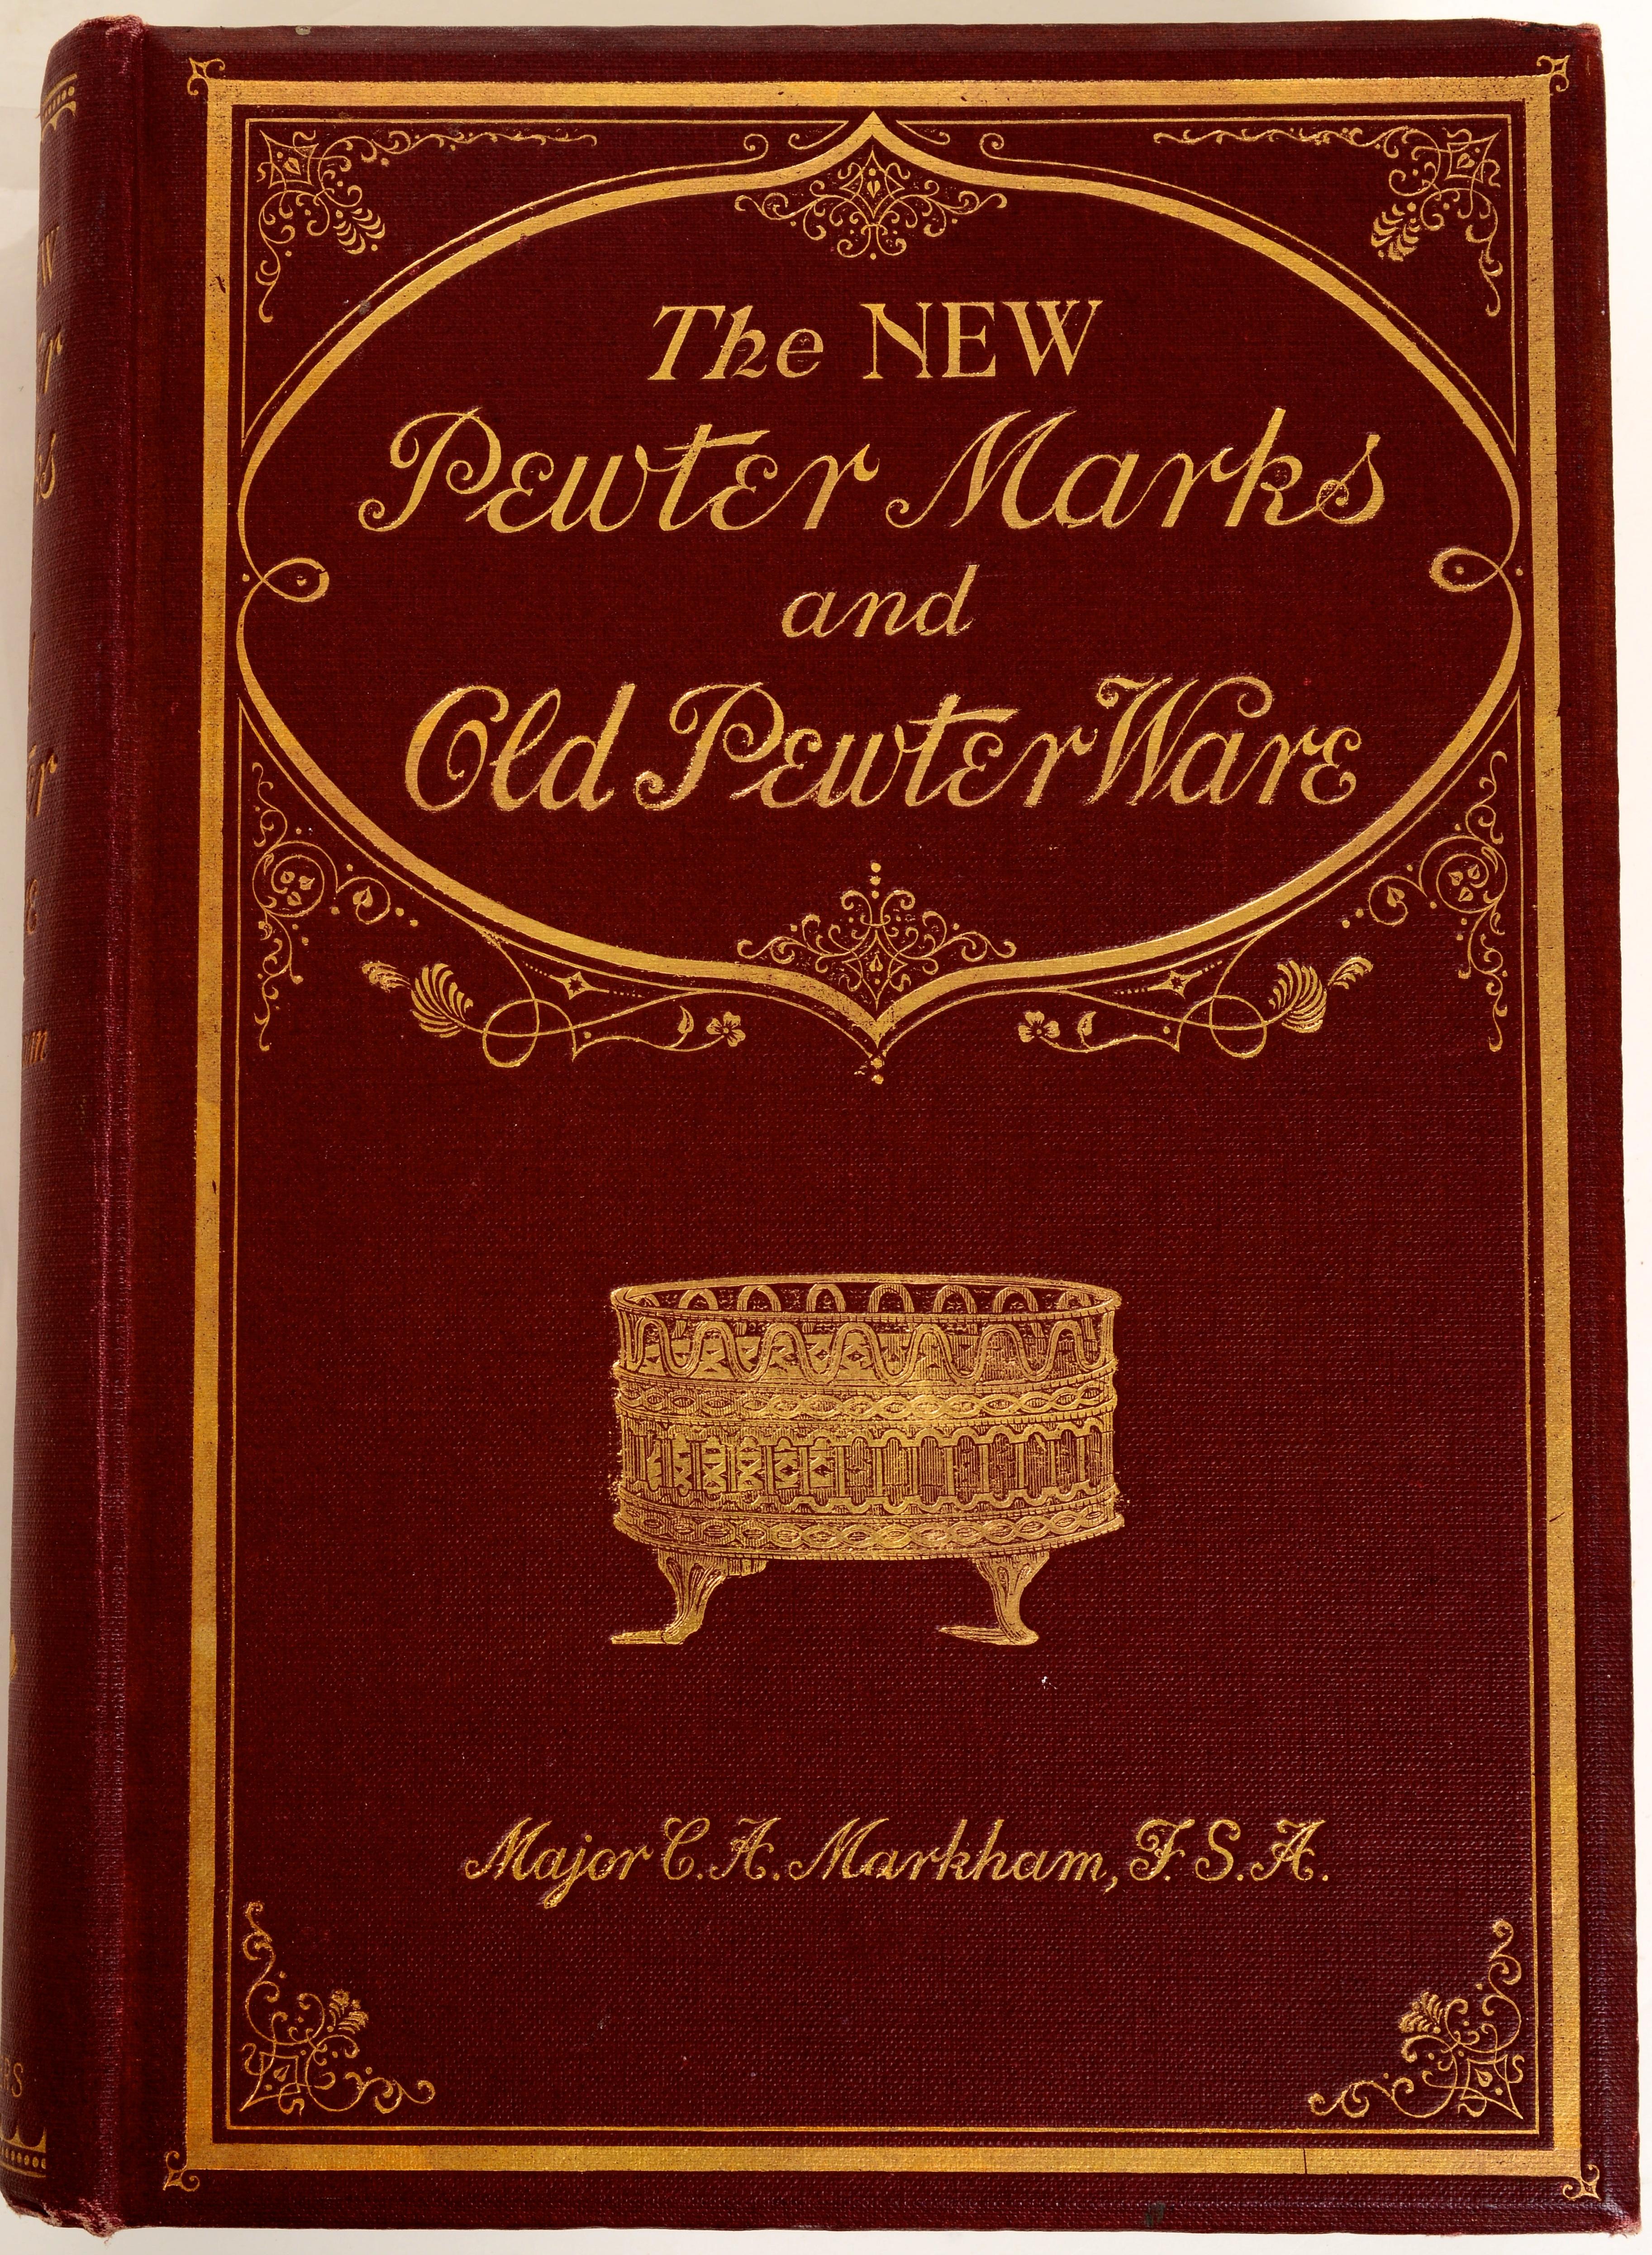 New Pewter Marks and Old Pewter Ware von Major C.A. Markham, 2. Auflage 1928